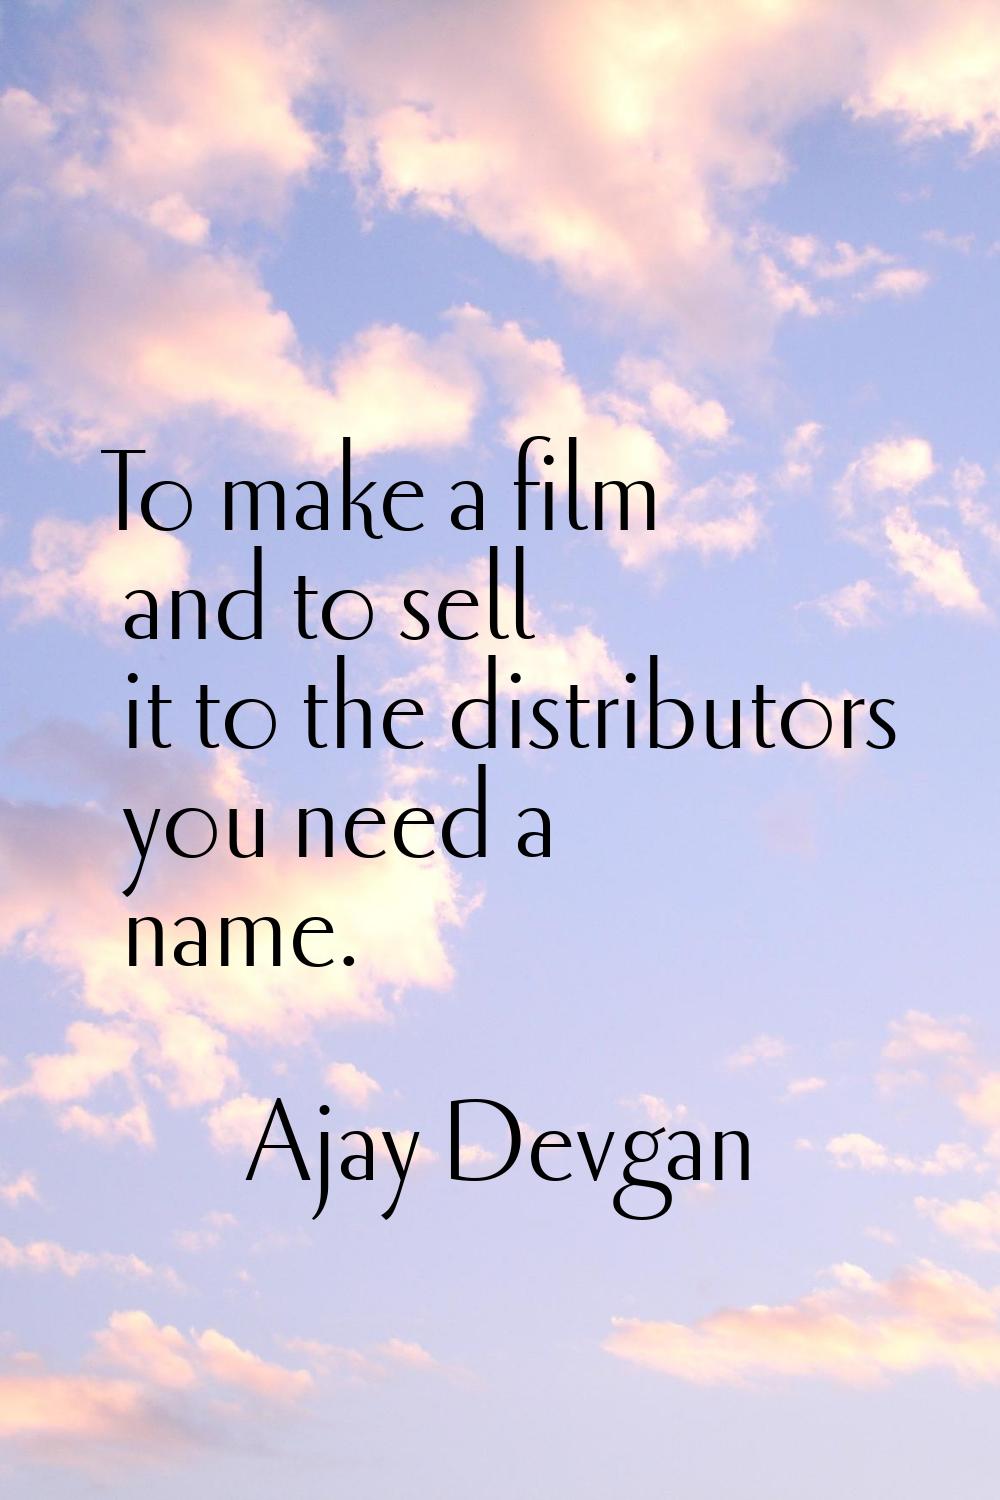 To make a film and to sell it to the distributors you need a name.